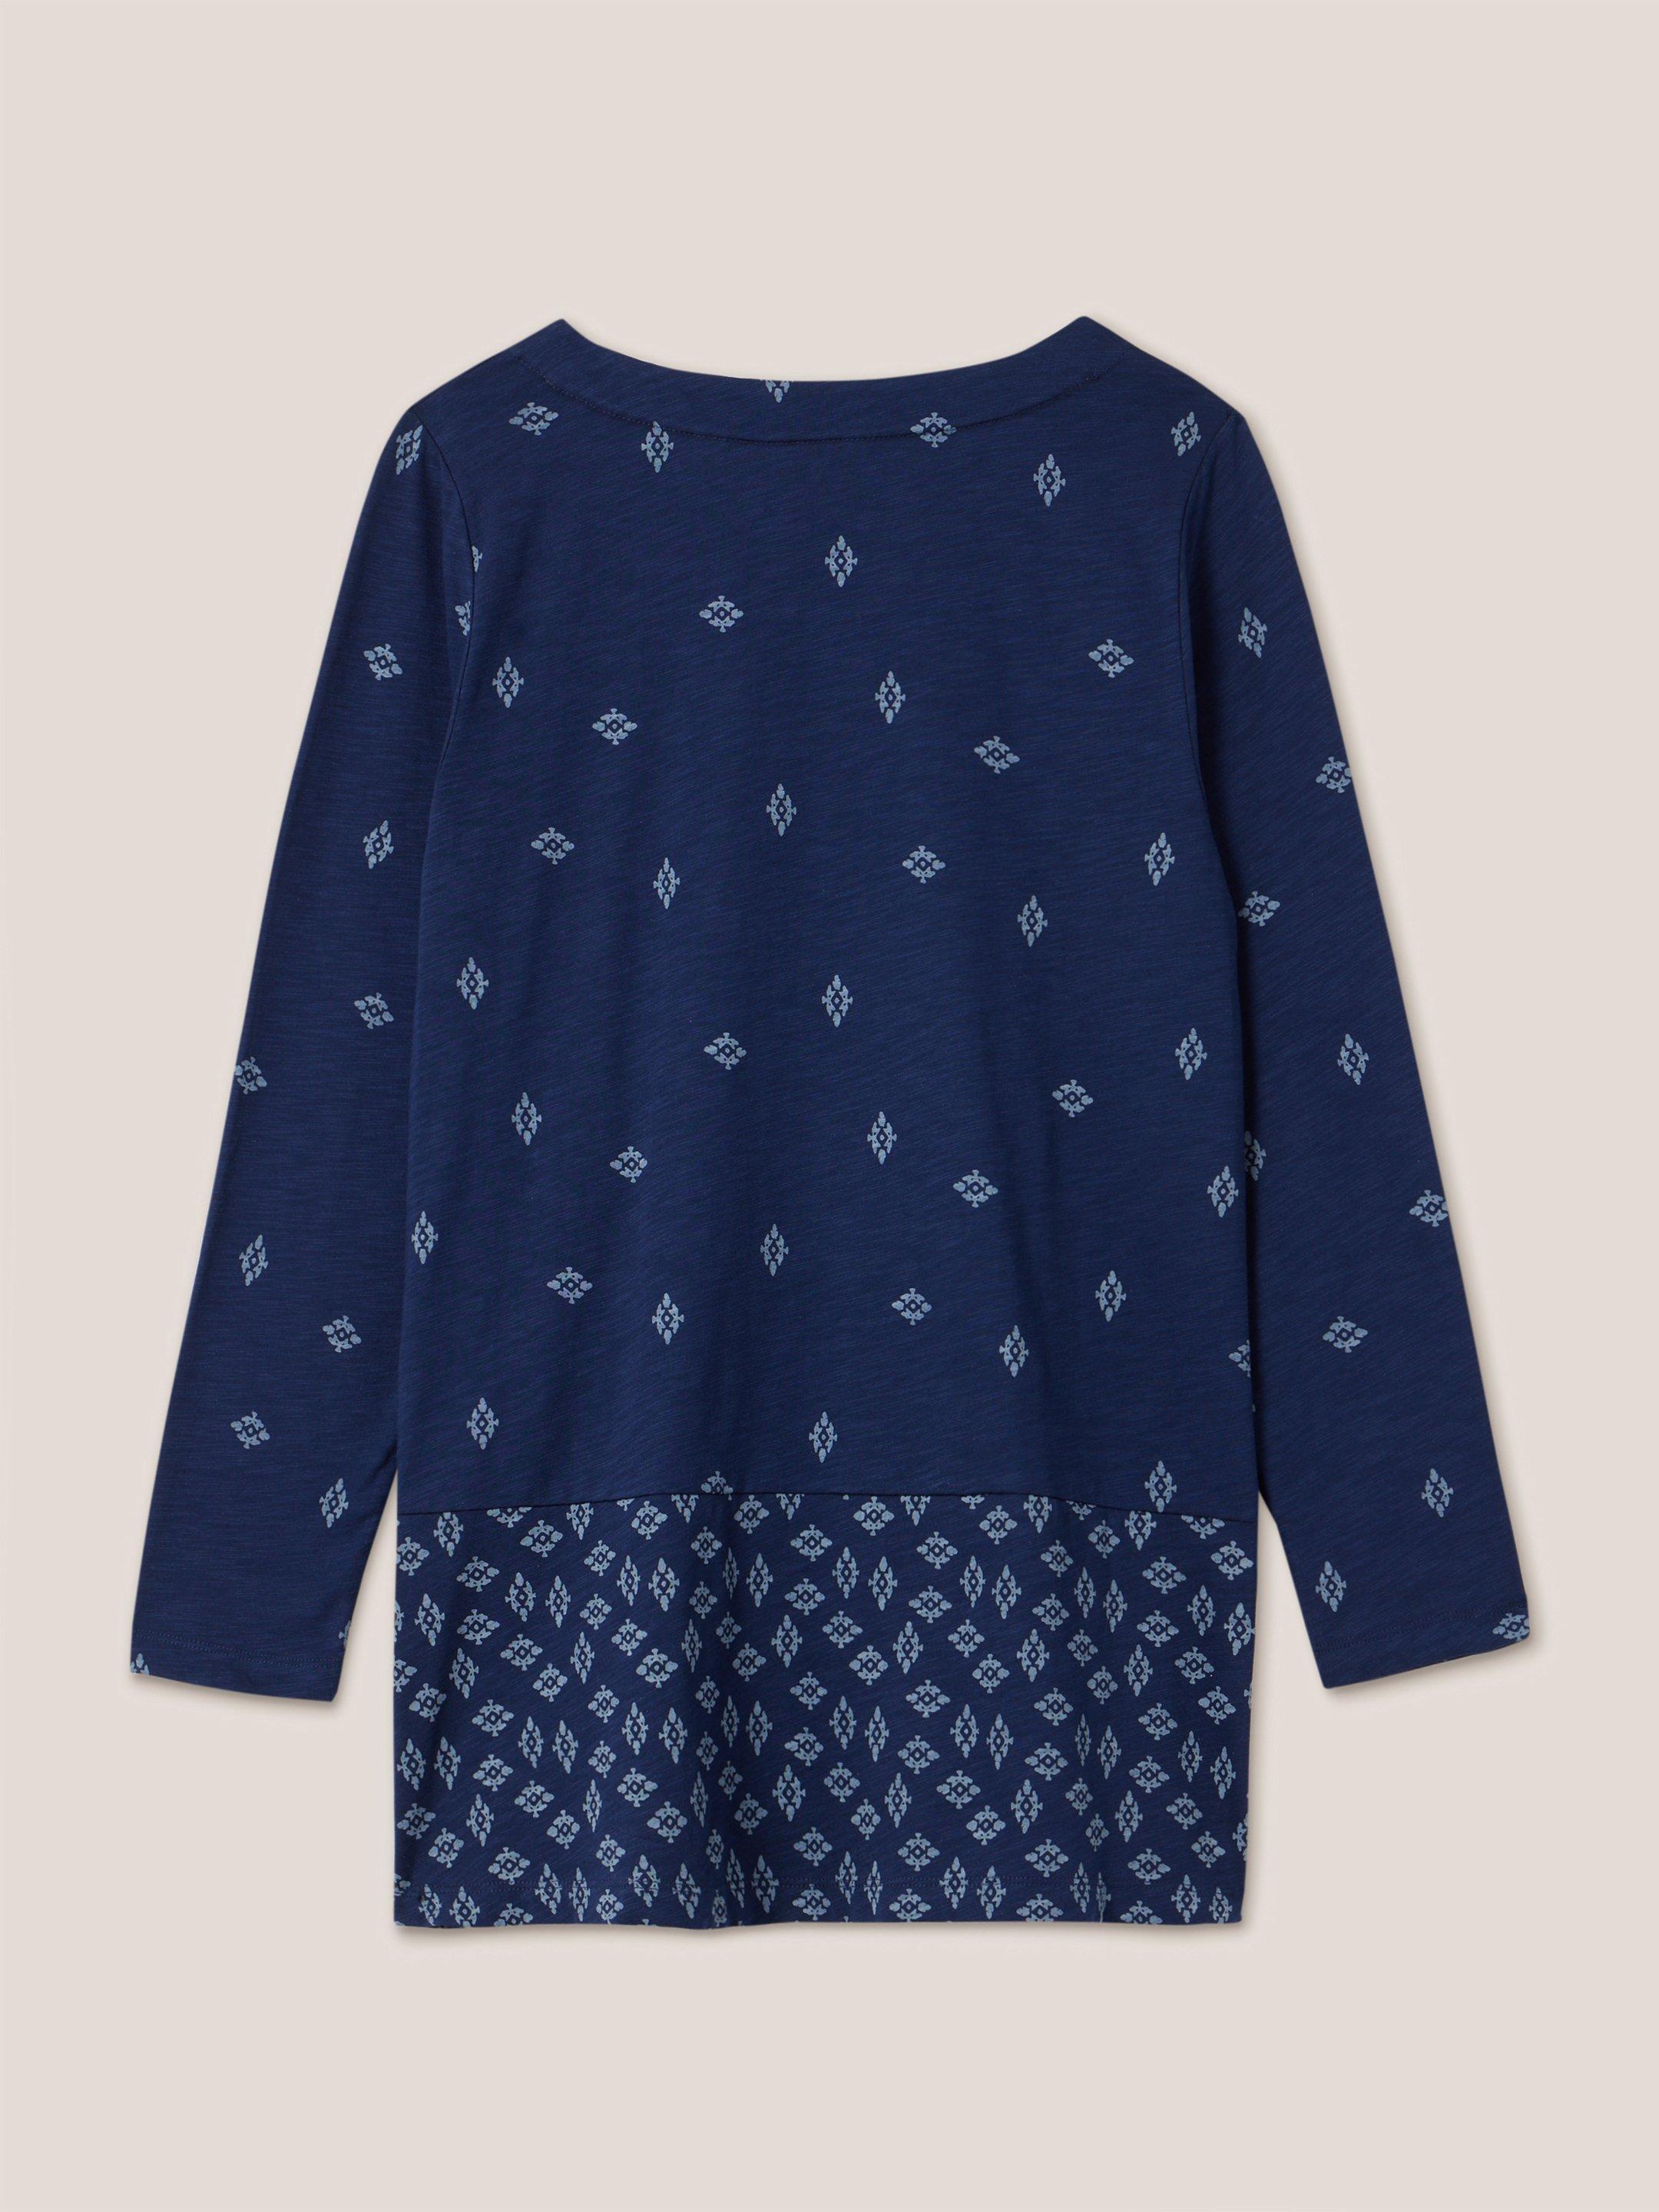 CARRIE LS TUNIC in NAVY PR - FLAT BACK